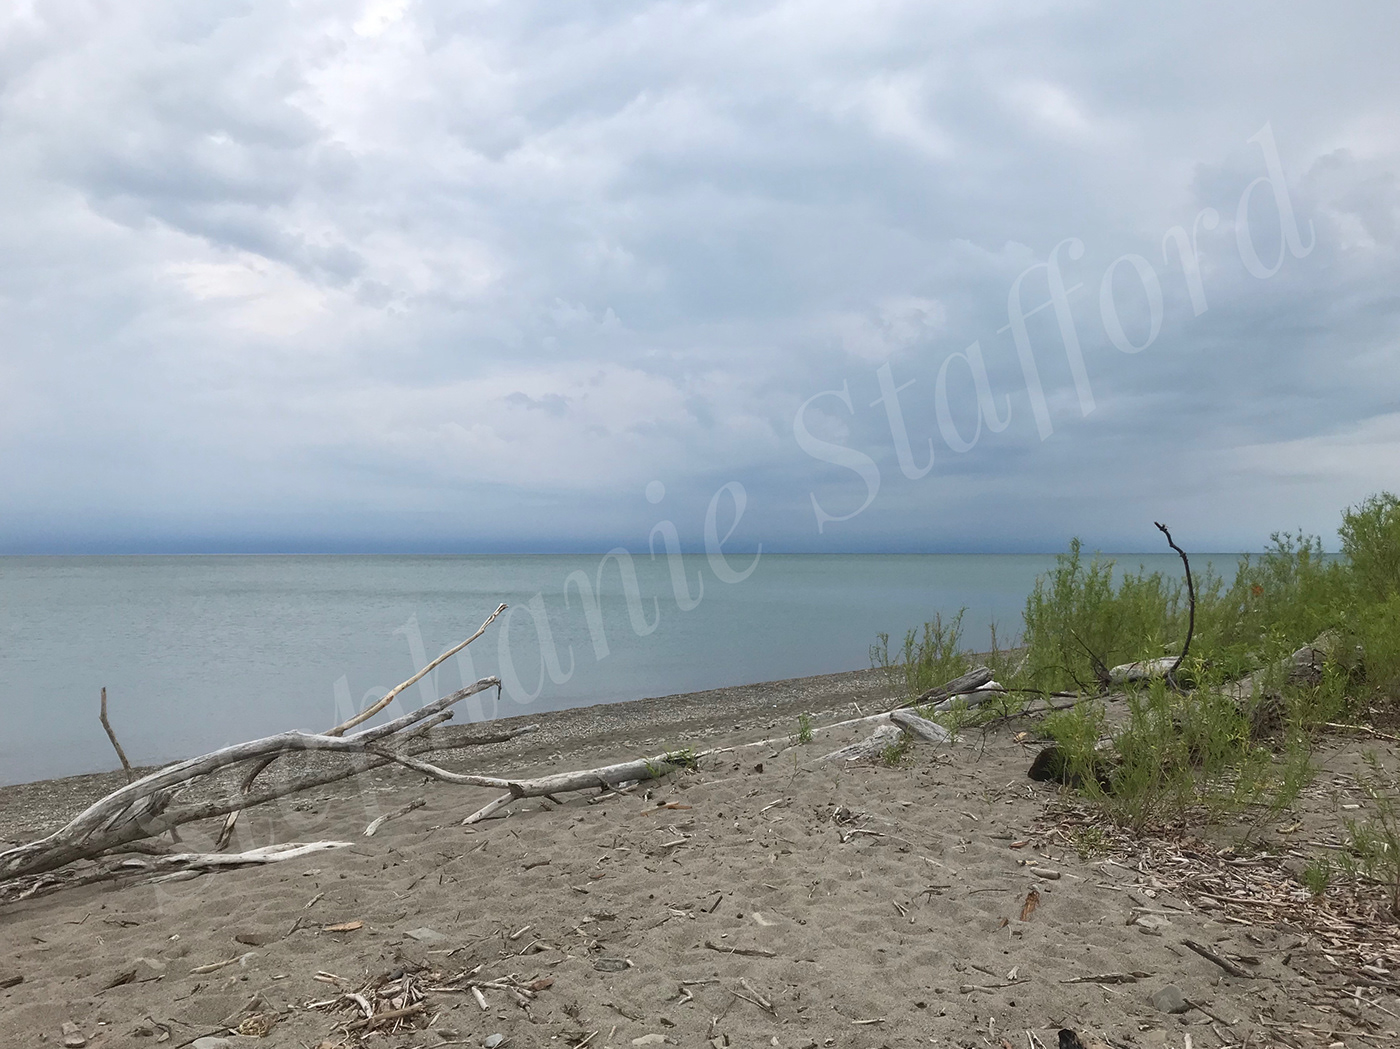 coastline weather vacation sand pier water waves splash storm waterscape light clouds seascape blue Surf shore lake beach Coast sea Ocean Island Seaside view stormy SKY scenic scenery Outdoor Nature Landscape horizon cloudy background bay harbor dock